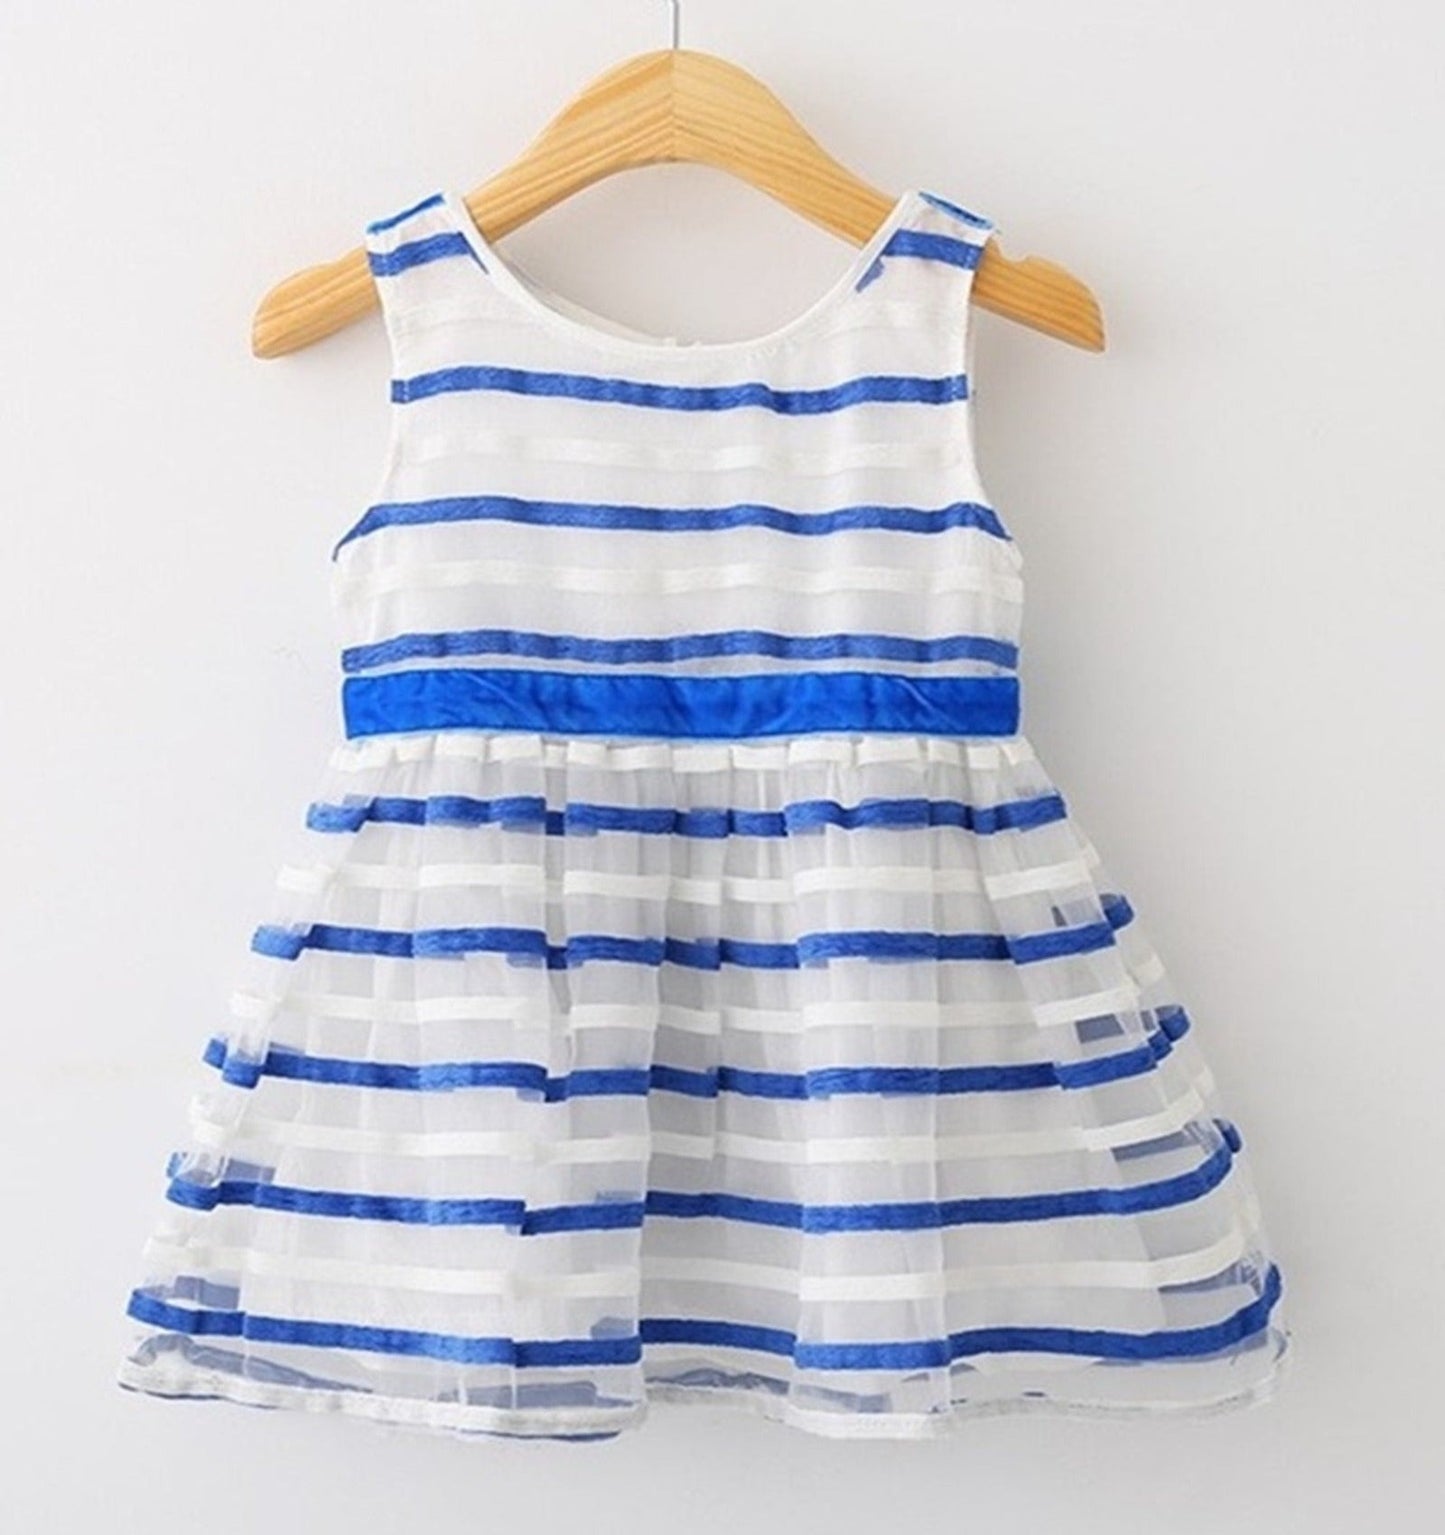 Neon Blue Cotton Party Dress 5-6 Years